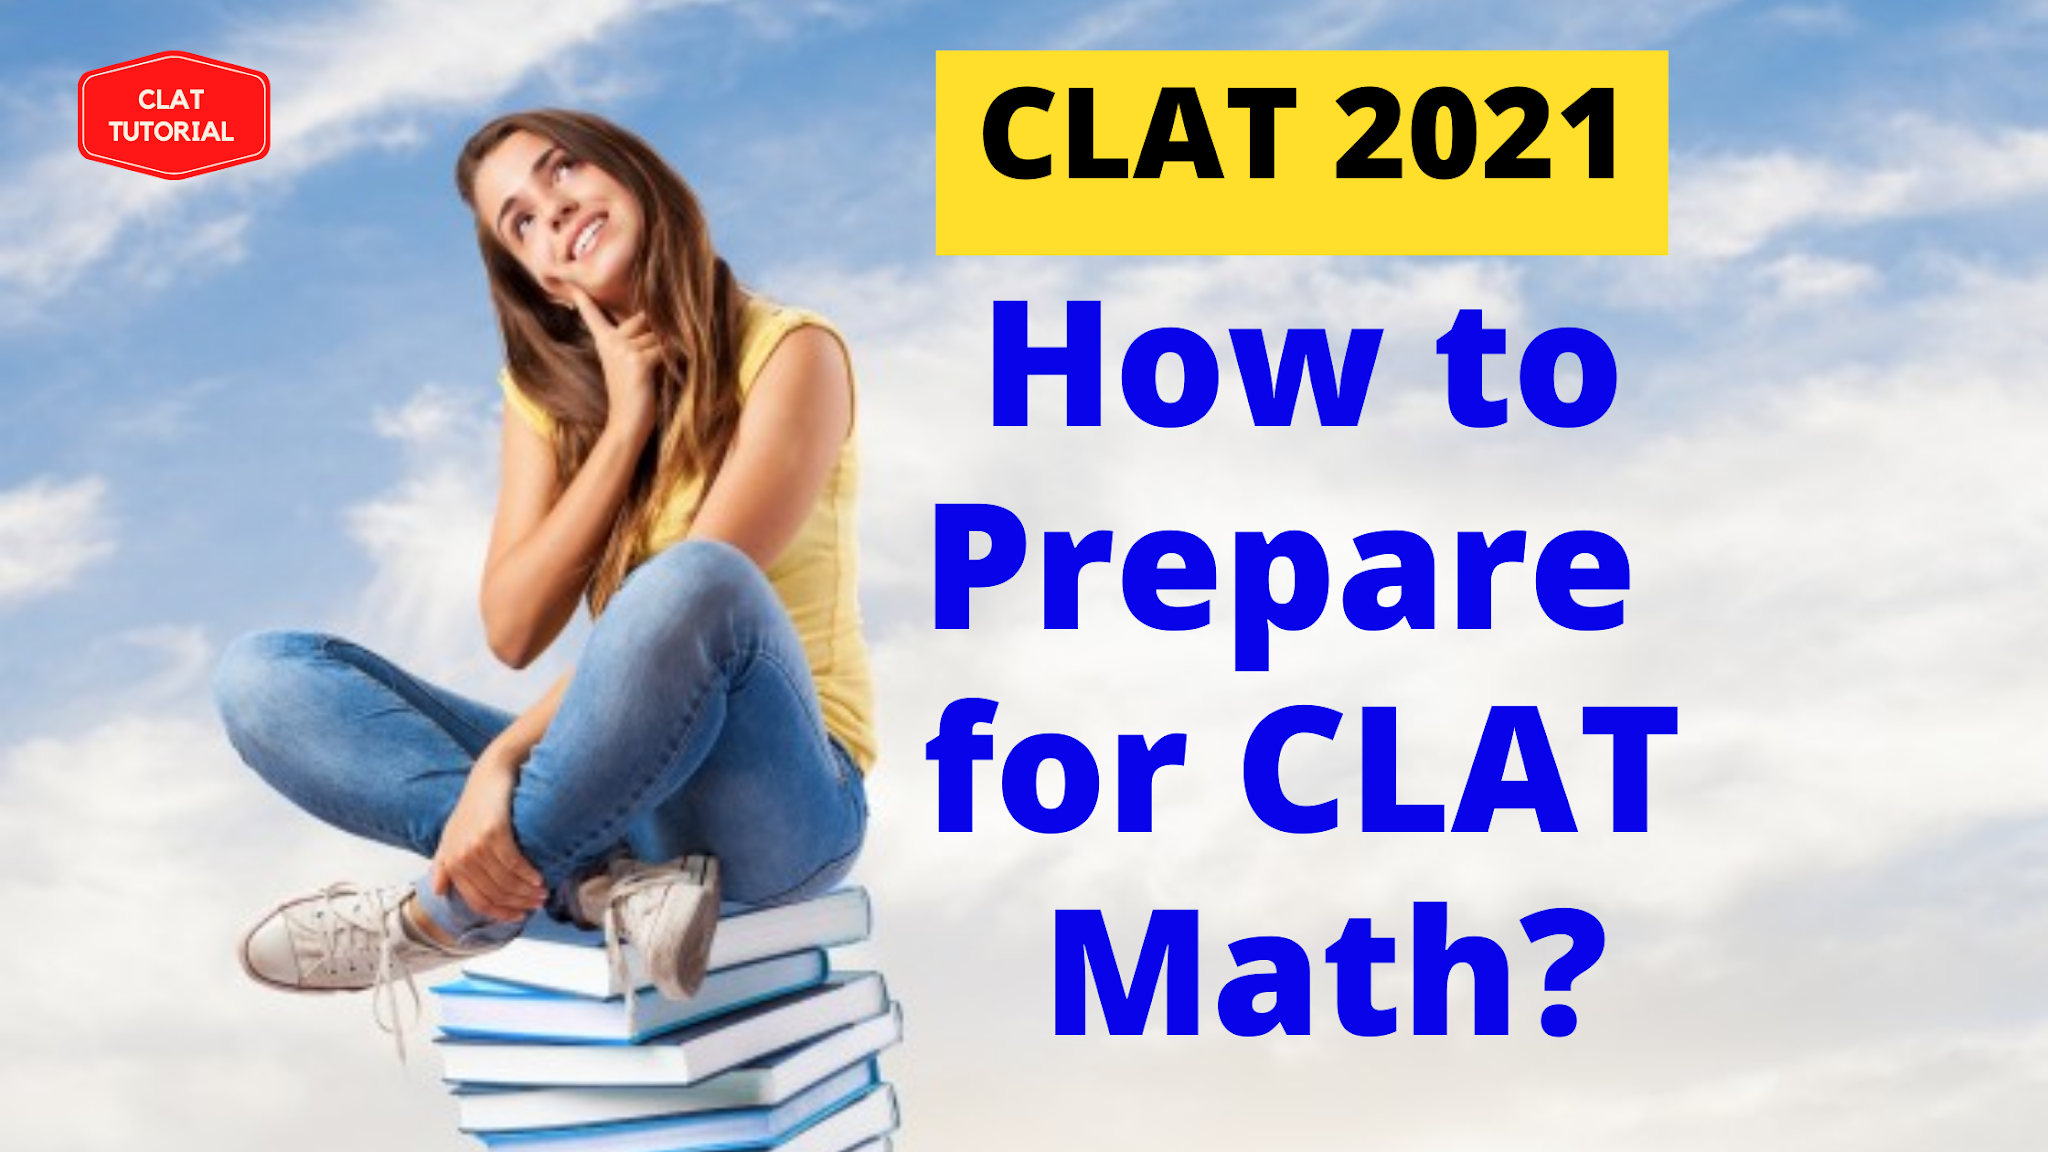 How to Prepare for CLAT Math?